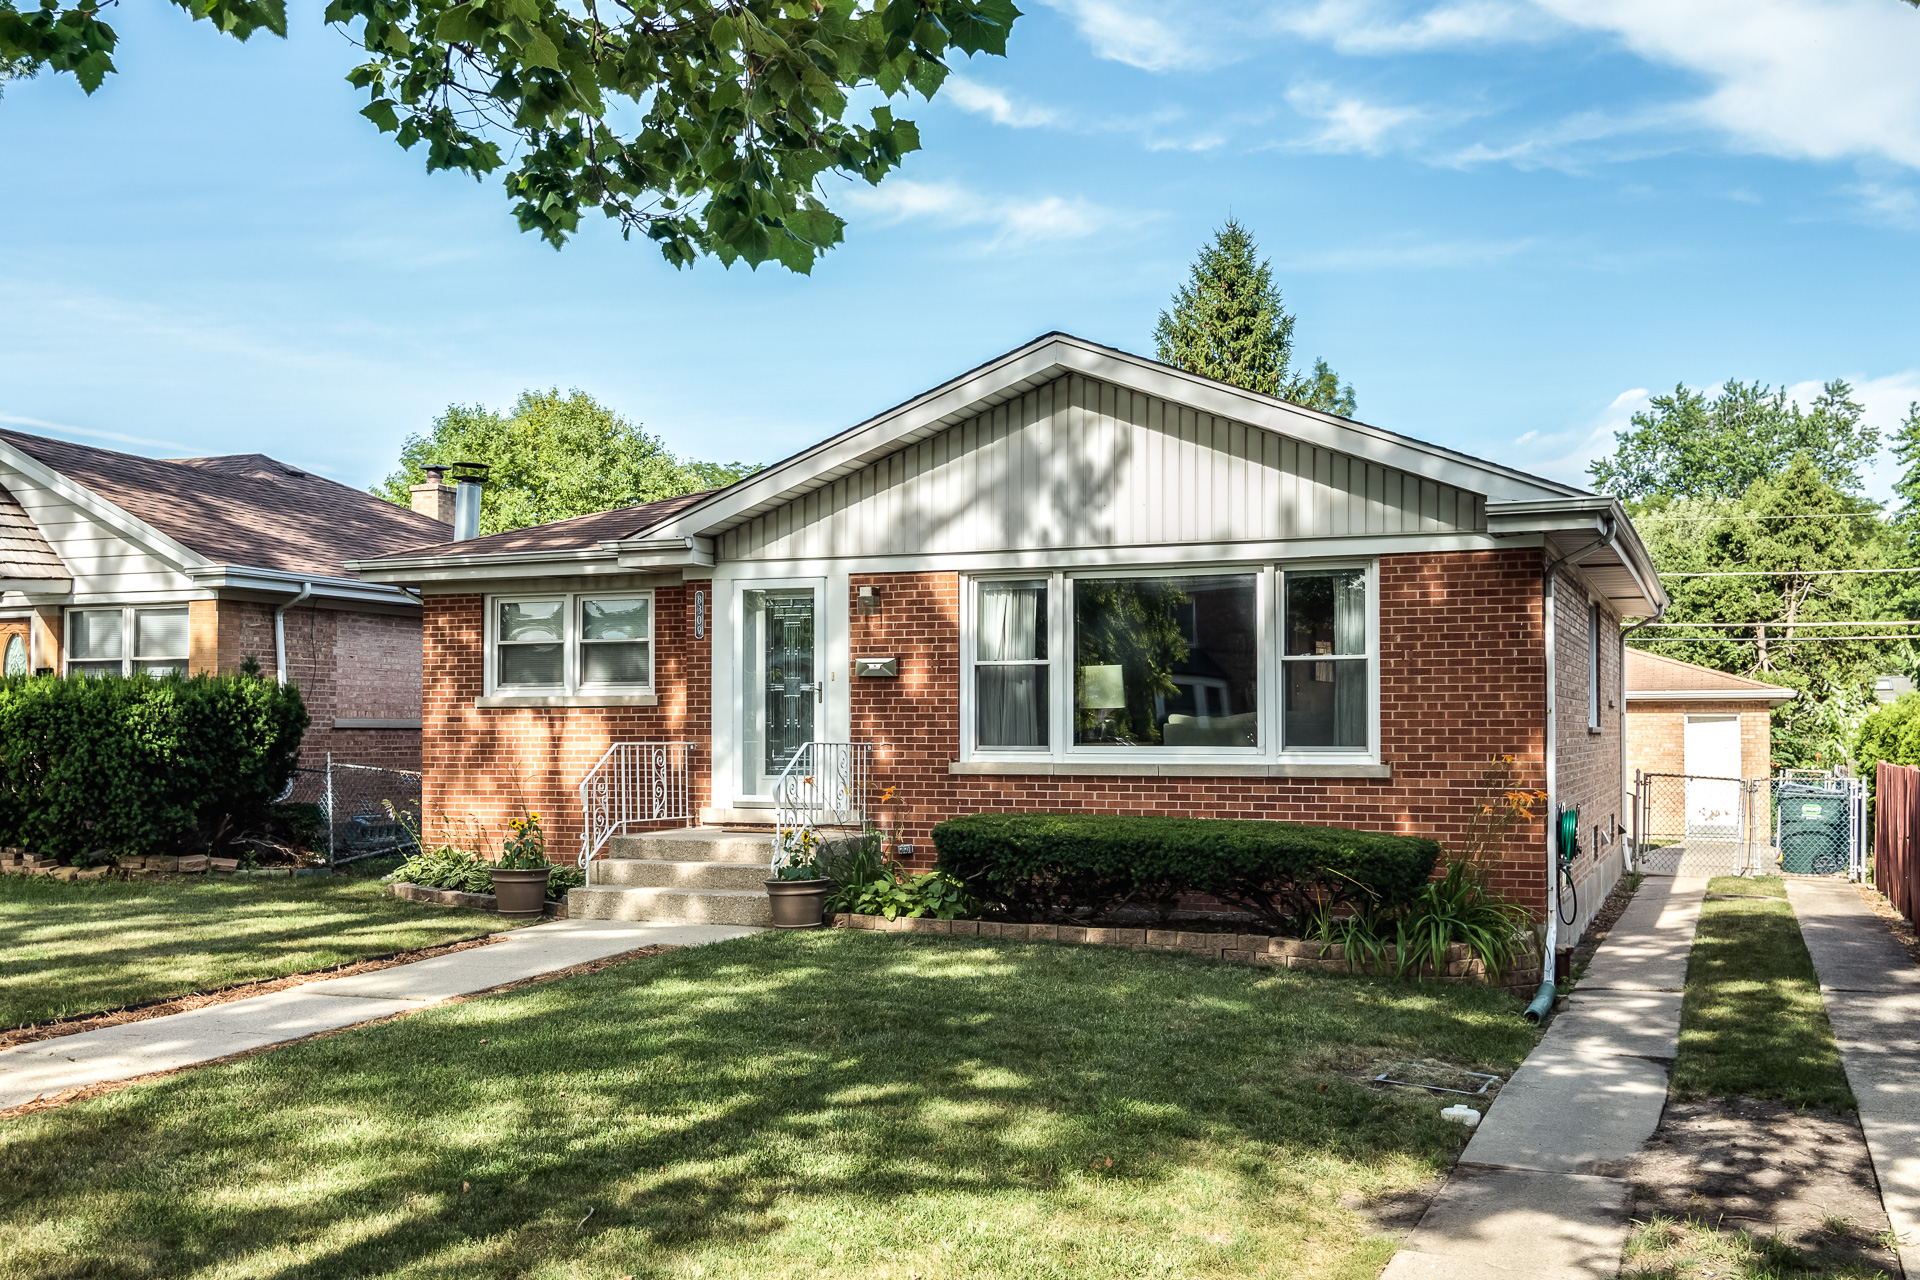 8309 N. Oriole Ave. Niles, IL